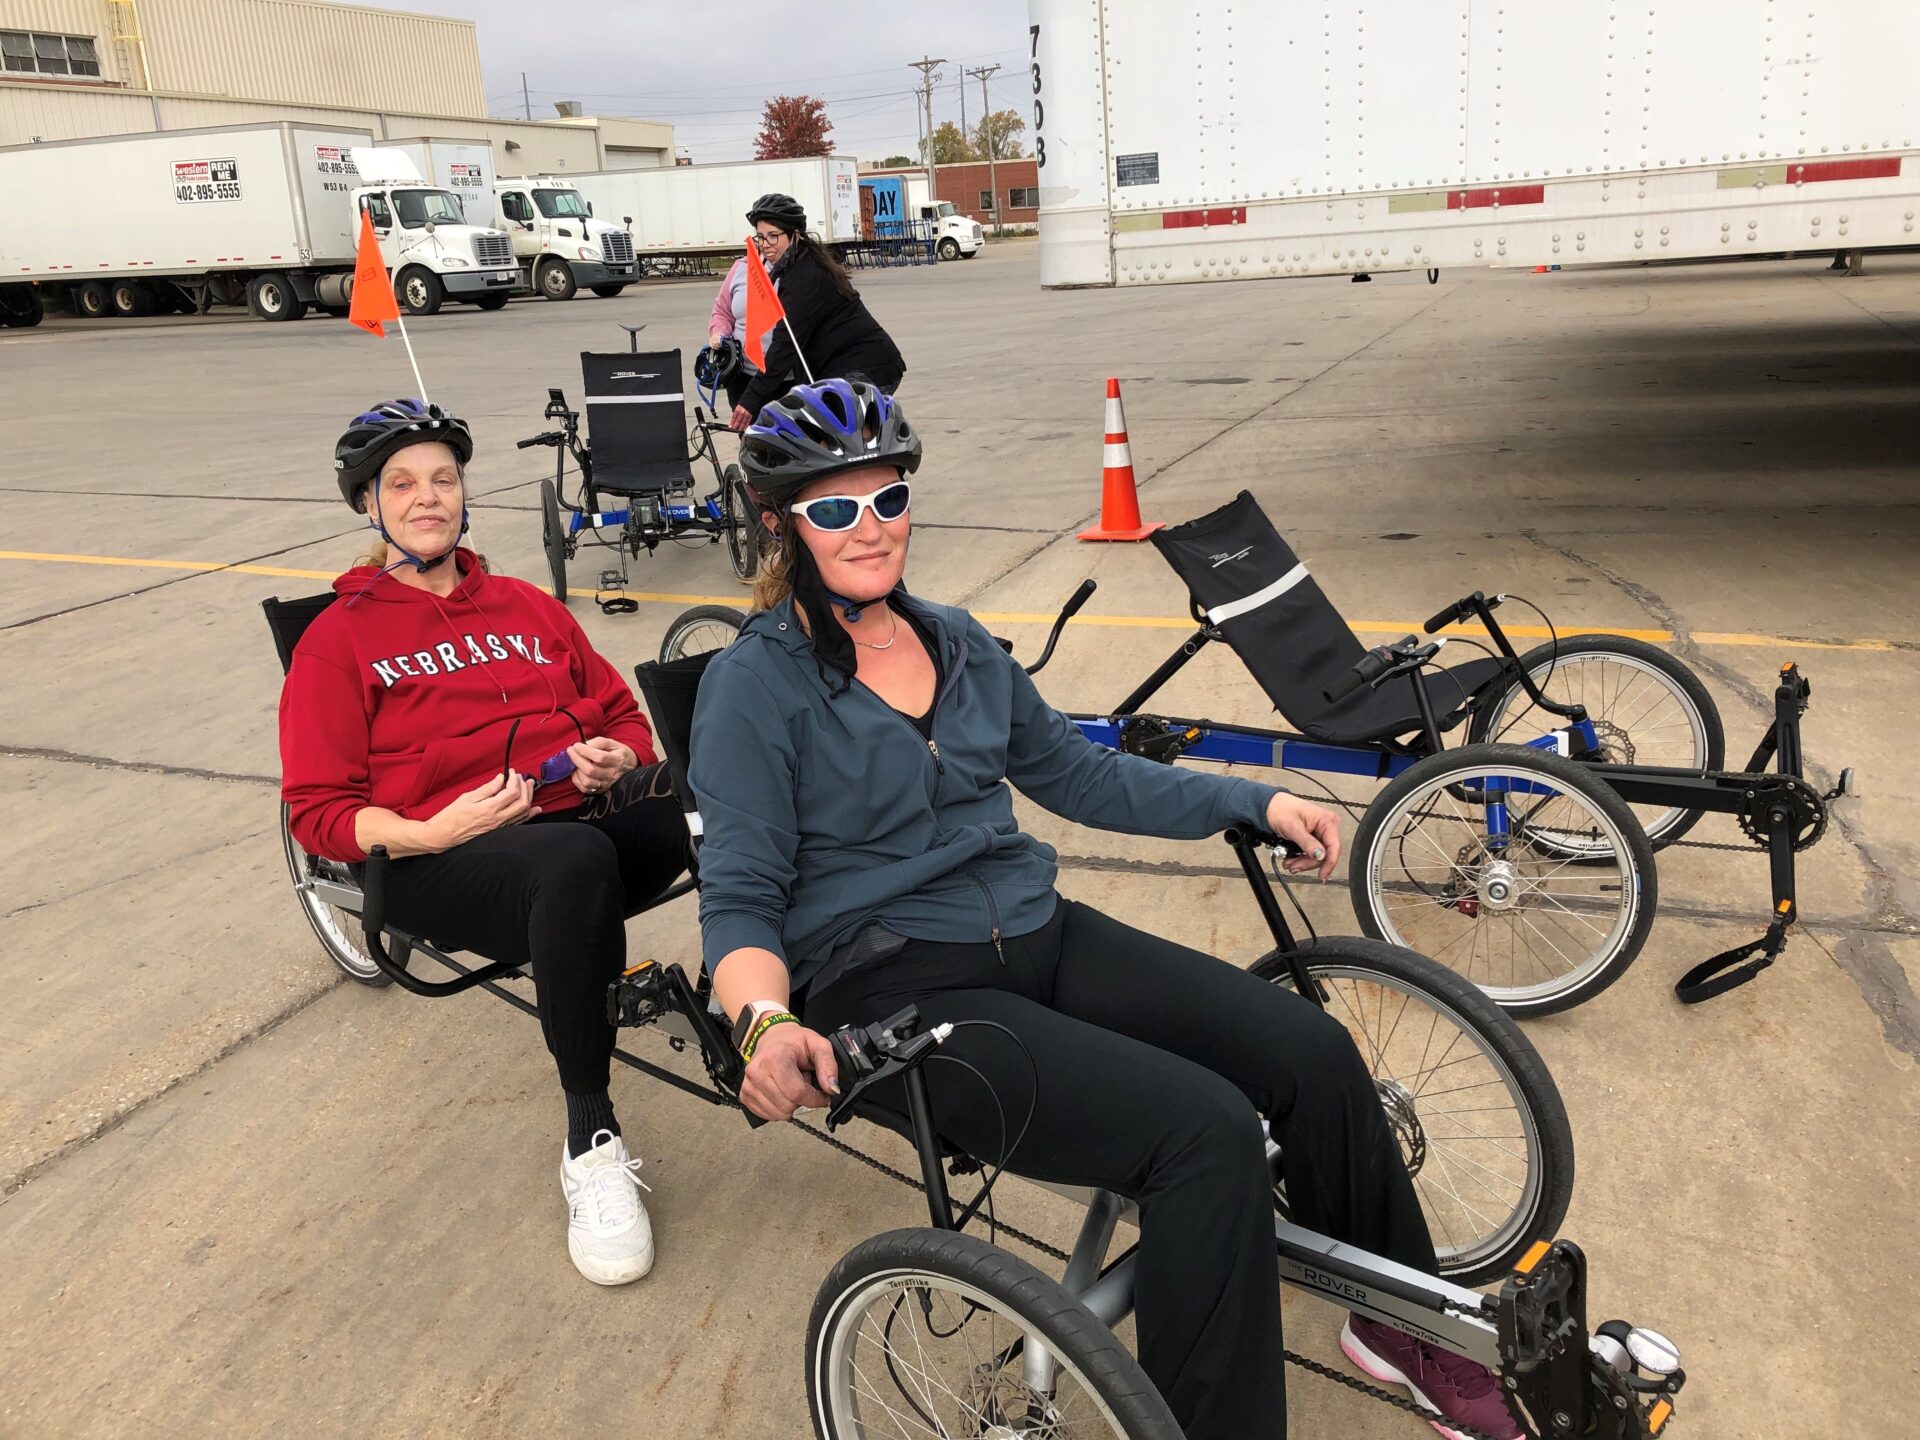 Two women with bike helmets on smiling and sitting on a tandem recumbent bike.